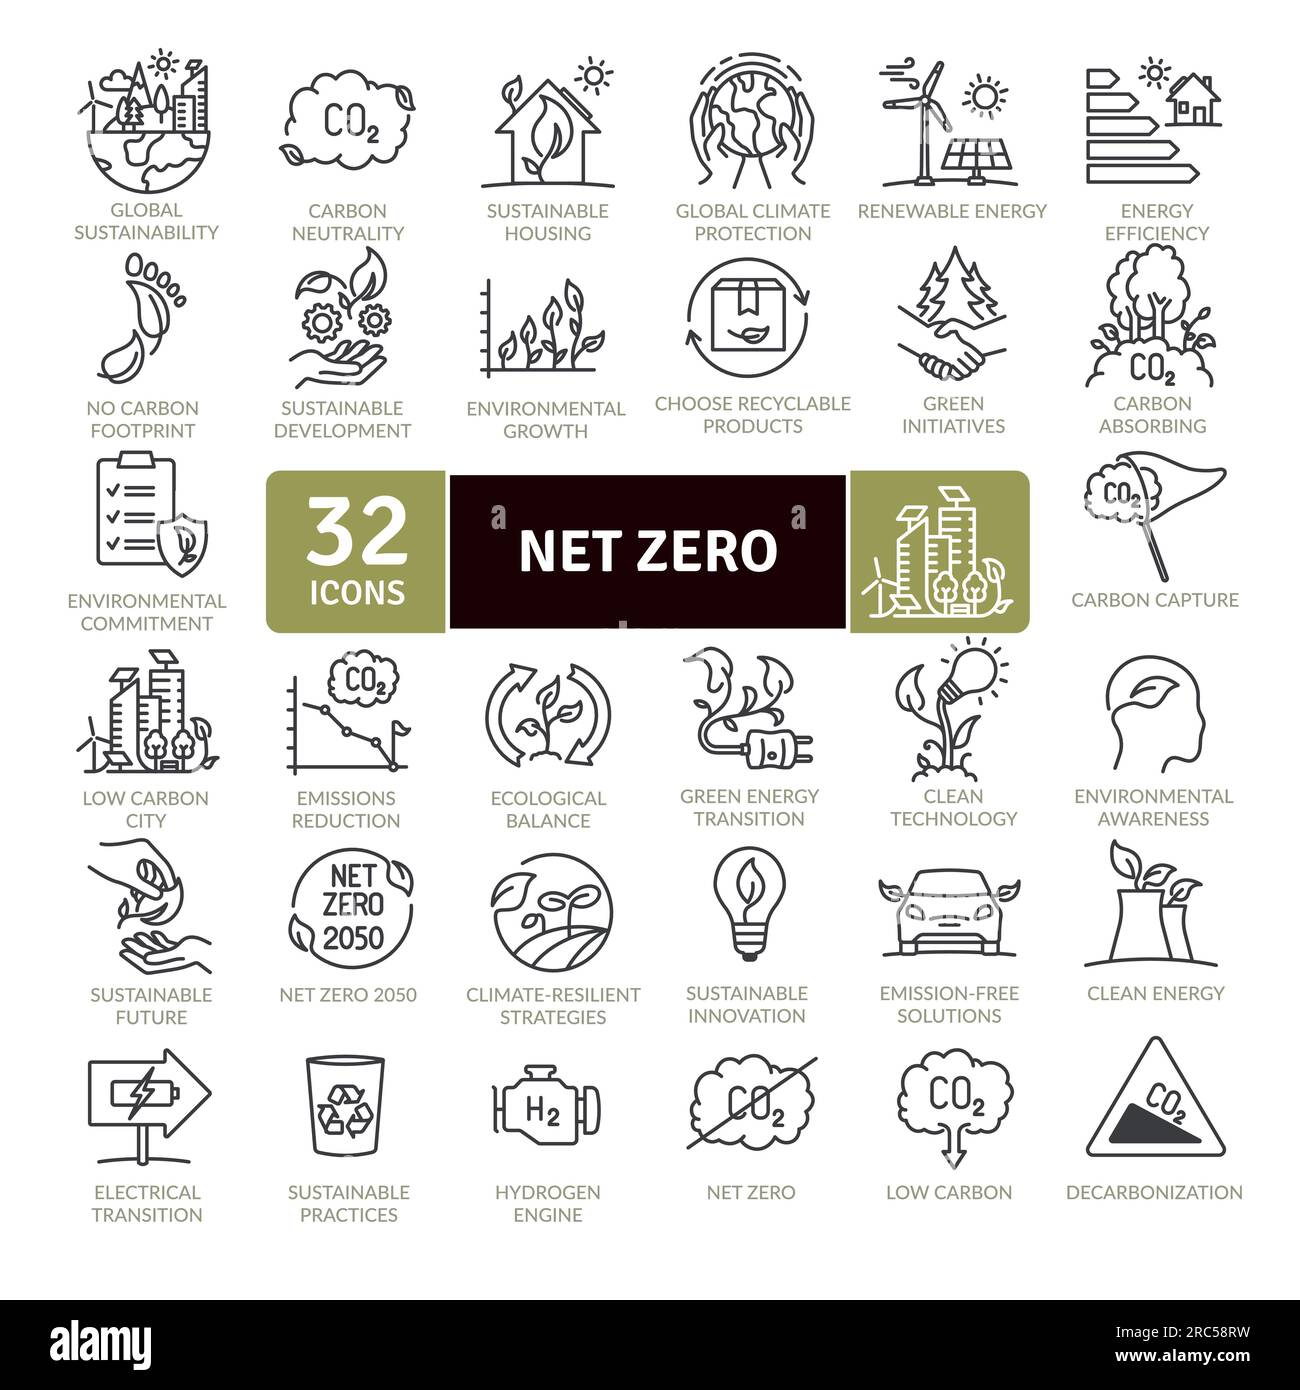 Net Zero and reduction of emissions by 2050 icon pack. Collection of thin line icons Stock Vector